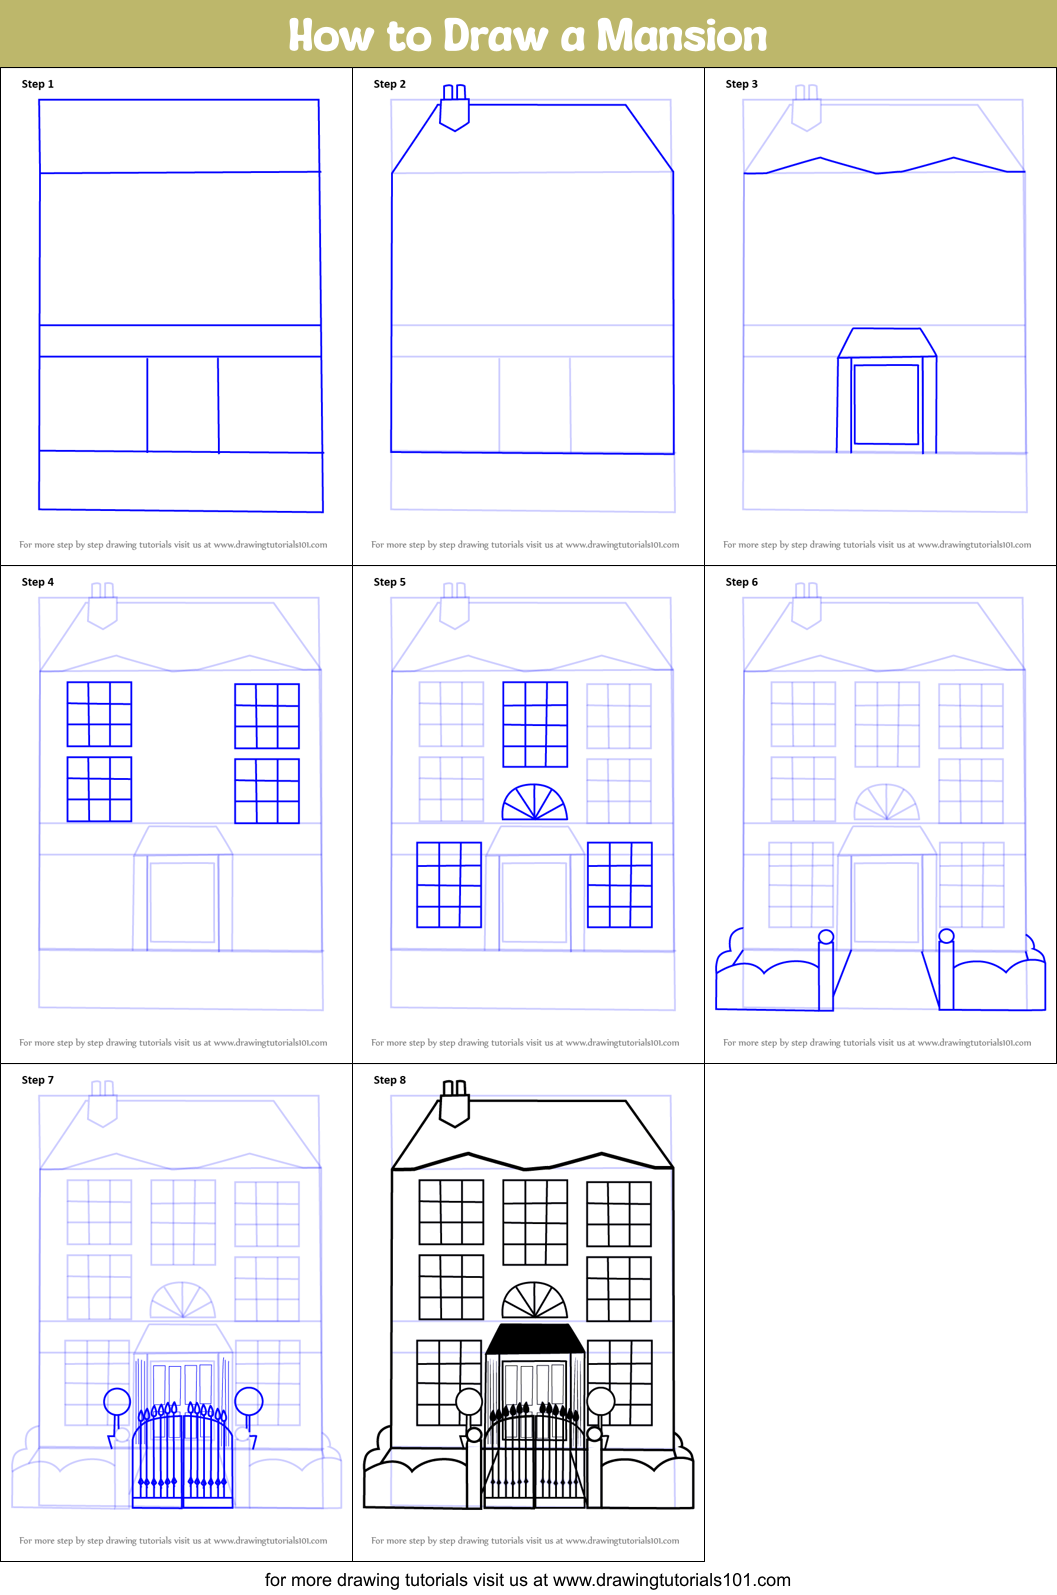 How to Draw a Mansion printable step by step drawing sheet